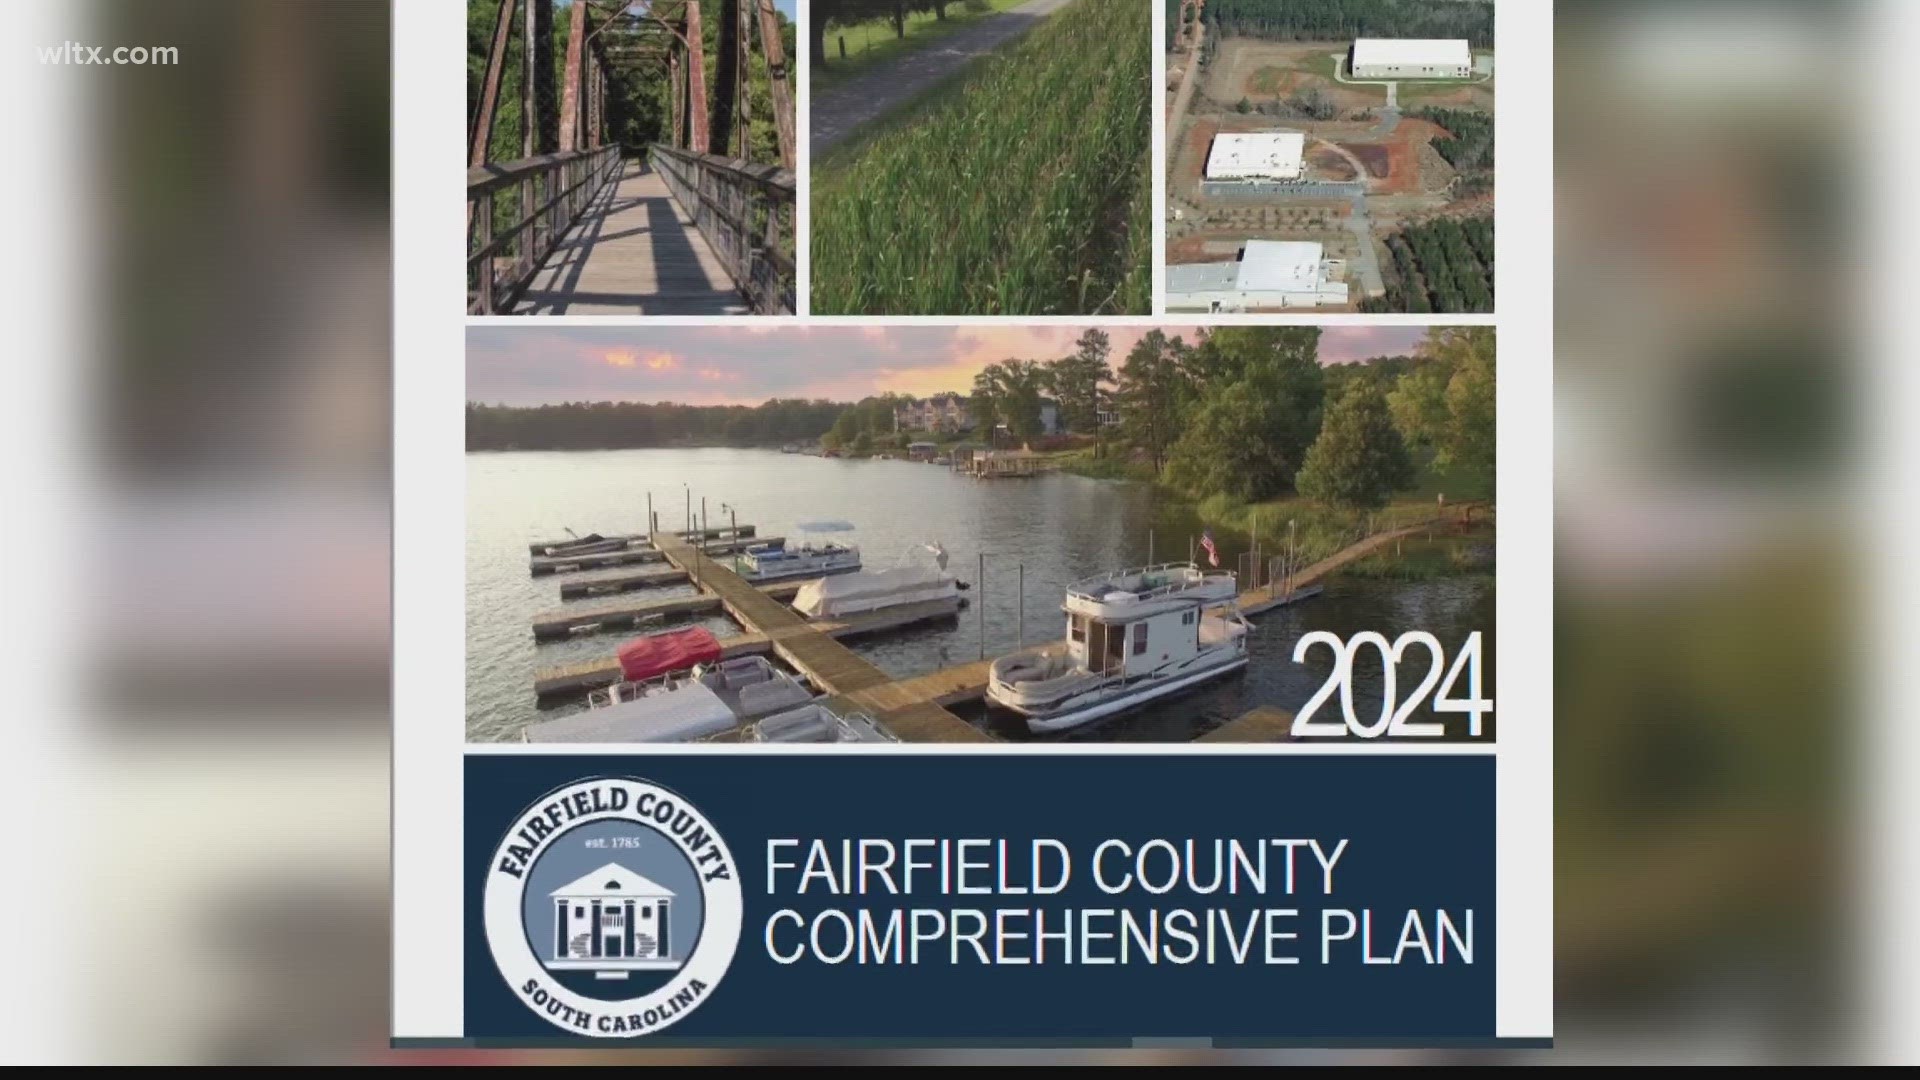 The county is mapping out what they hope to look like in the next ten years with their comprehensive plan.